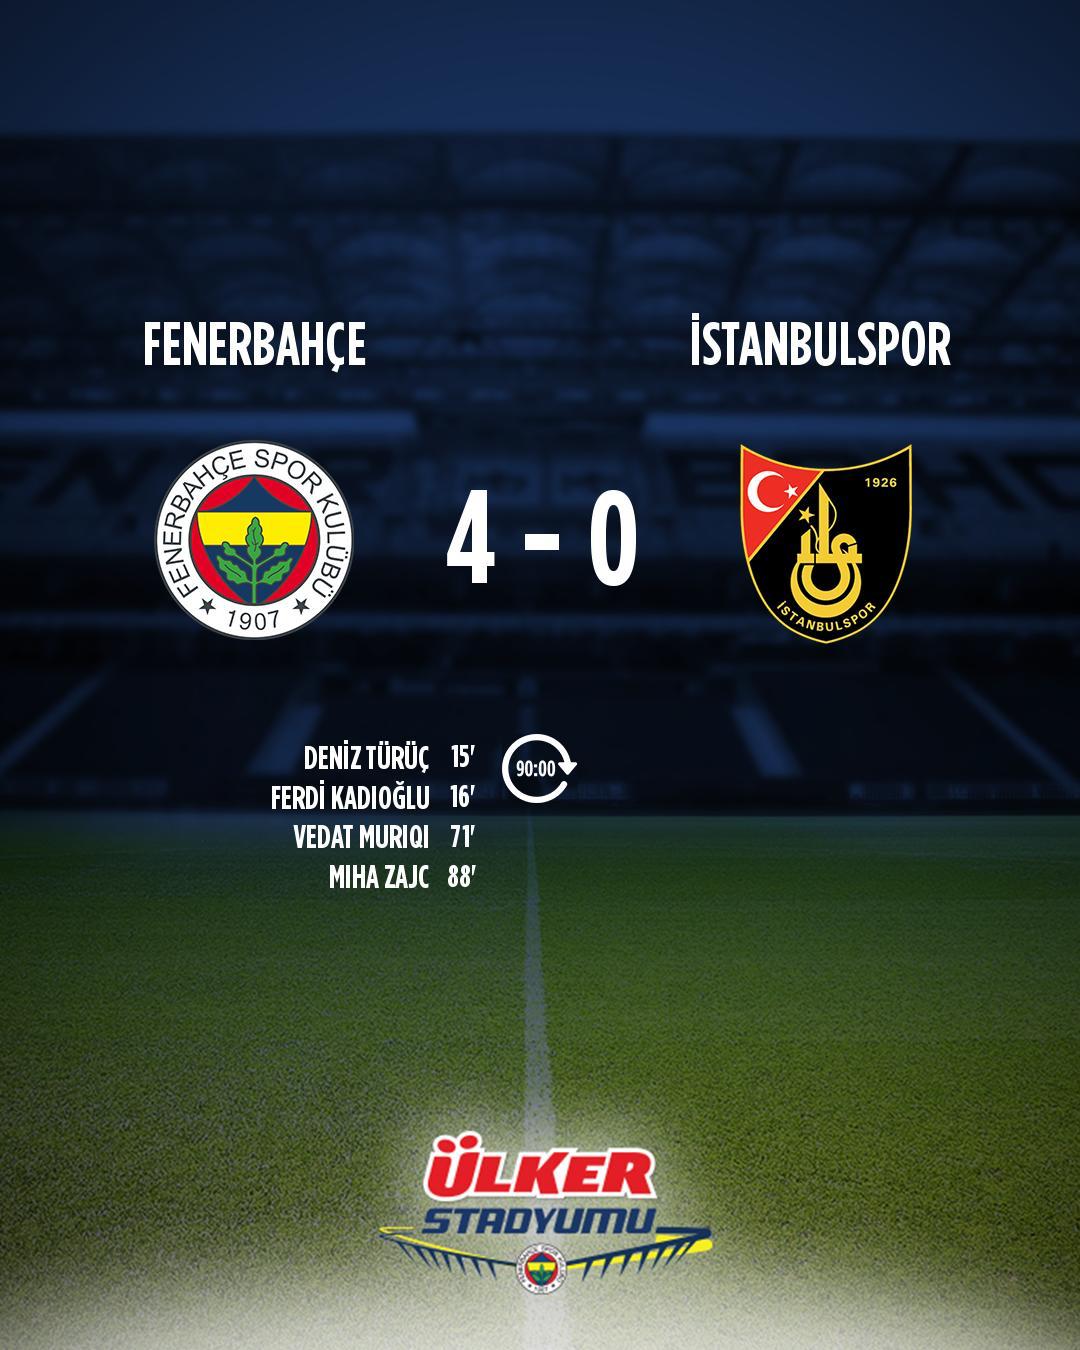 Fenerbahçe vs Trabzonspor: A Classic Rivalry in Turkish Football